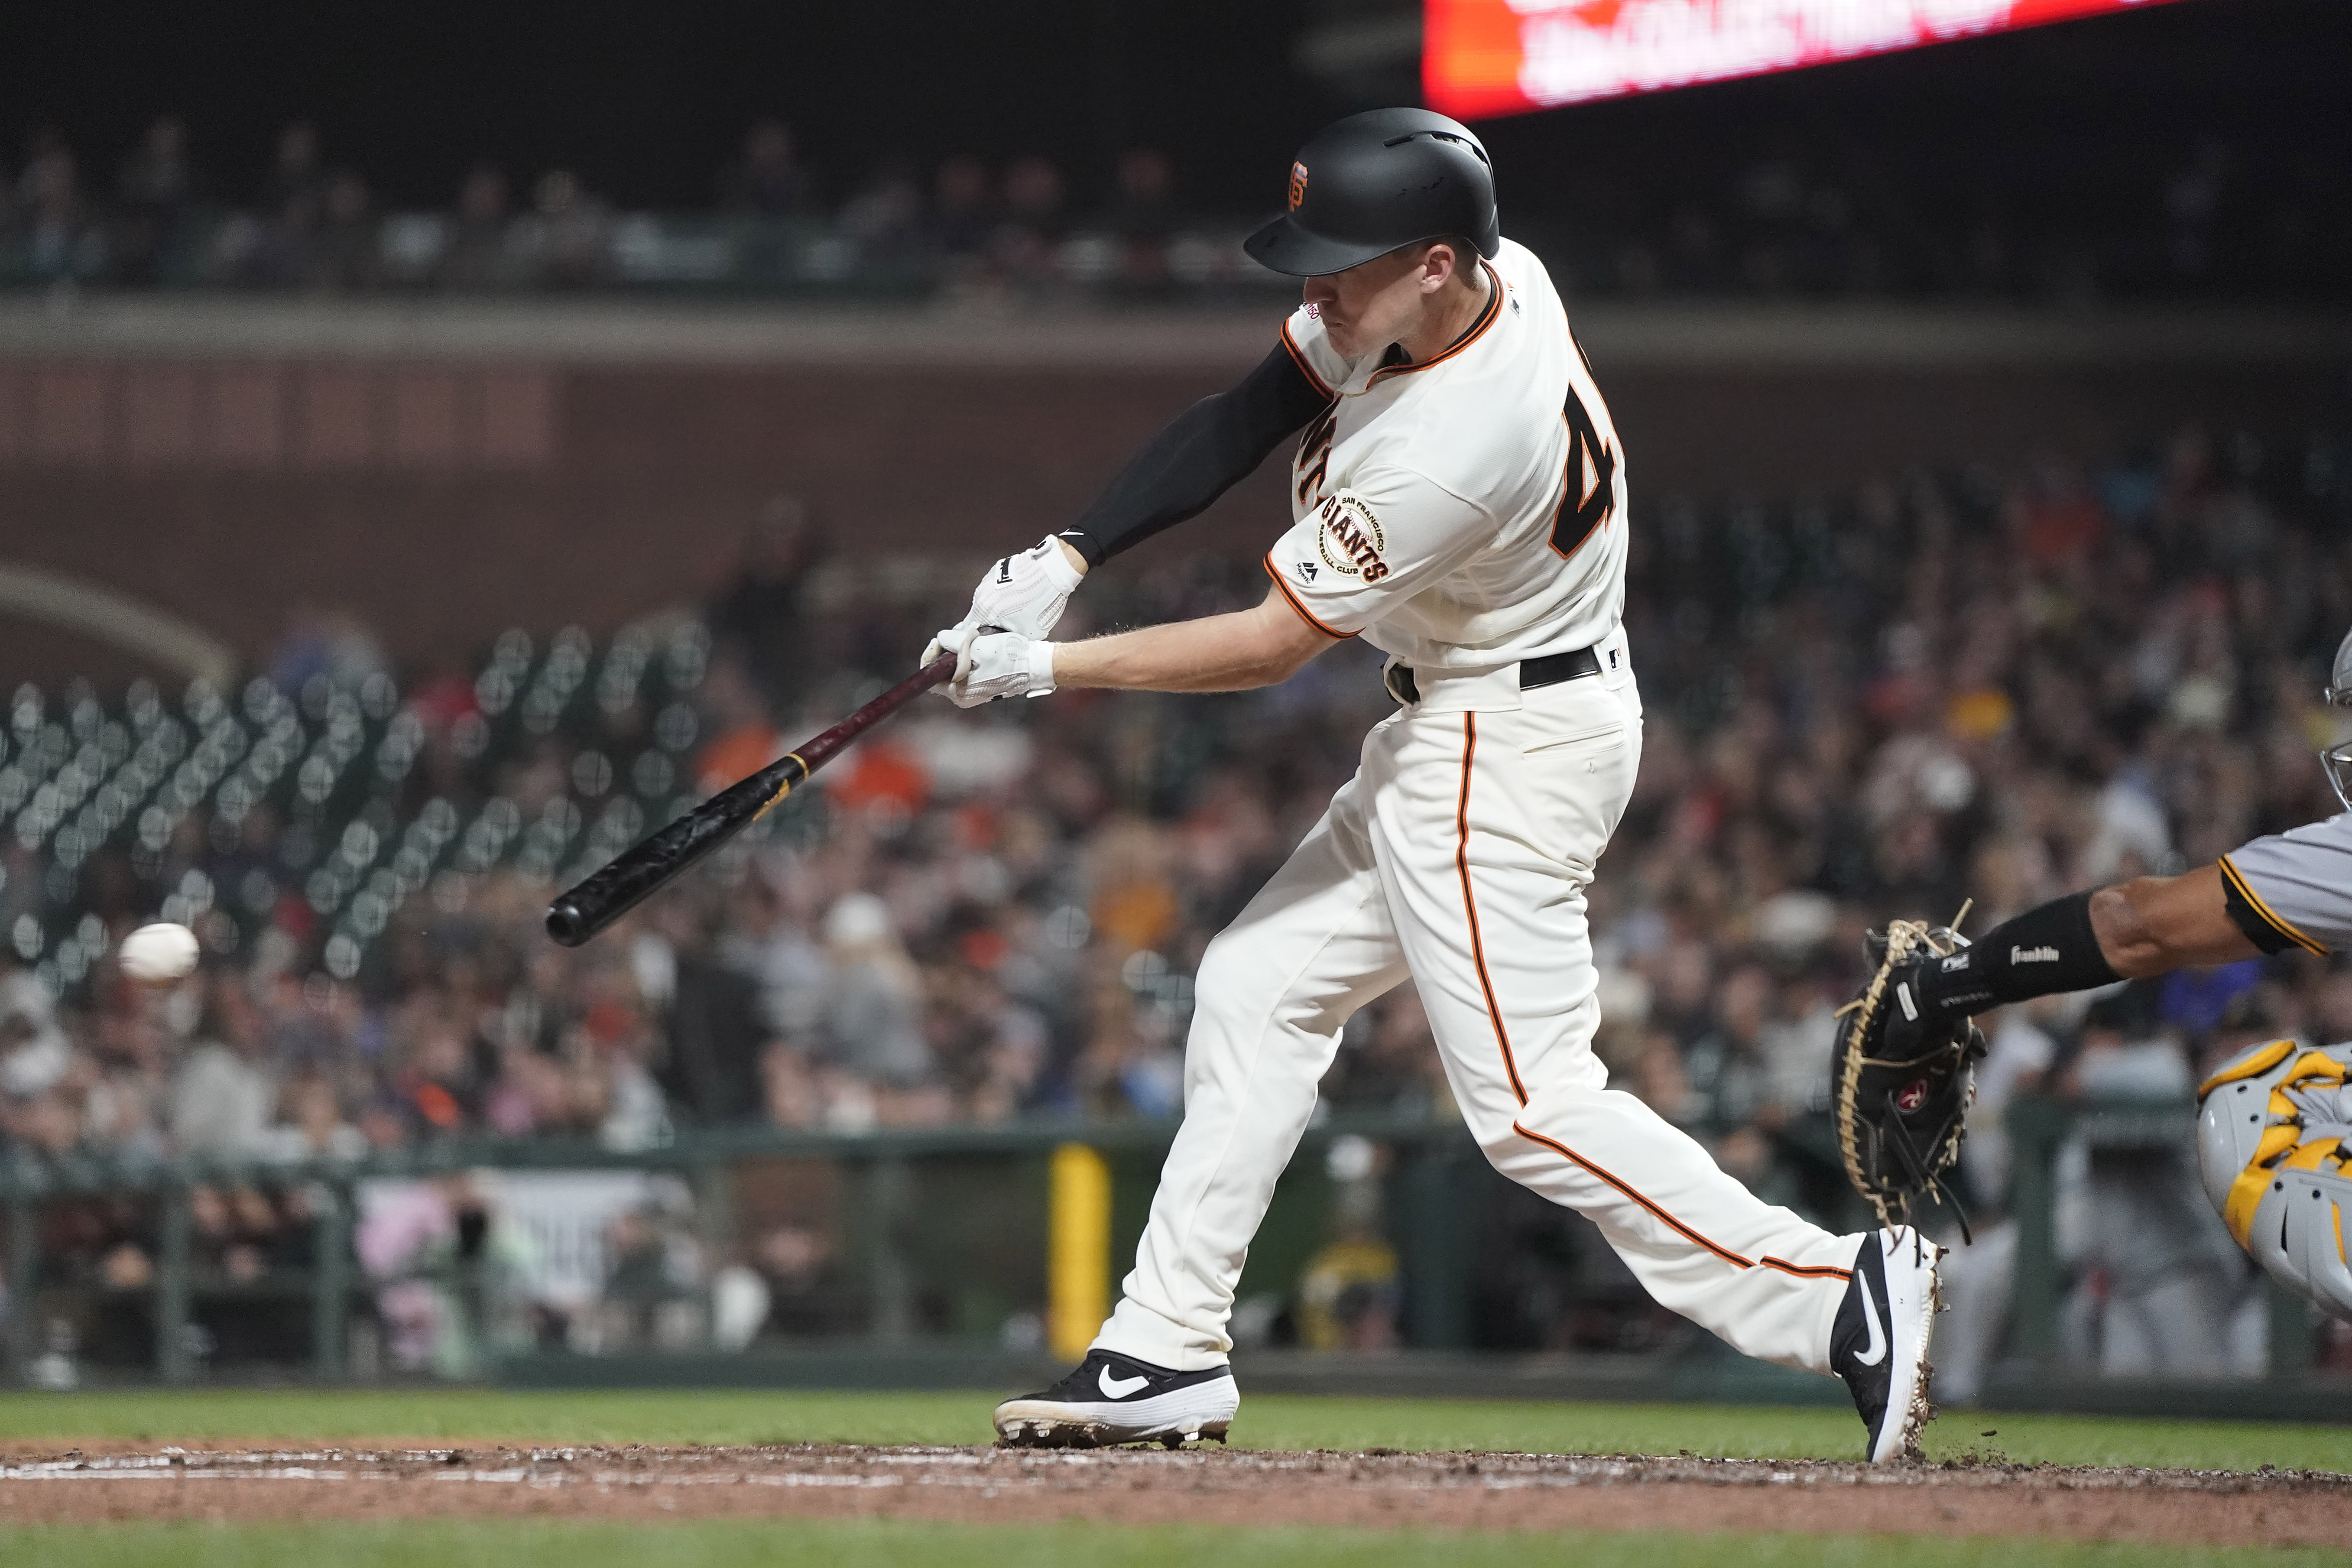 Pirates take fight to Giants, Vázquez closes out 27th save